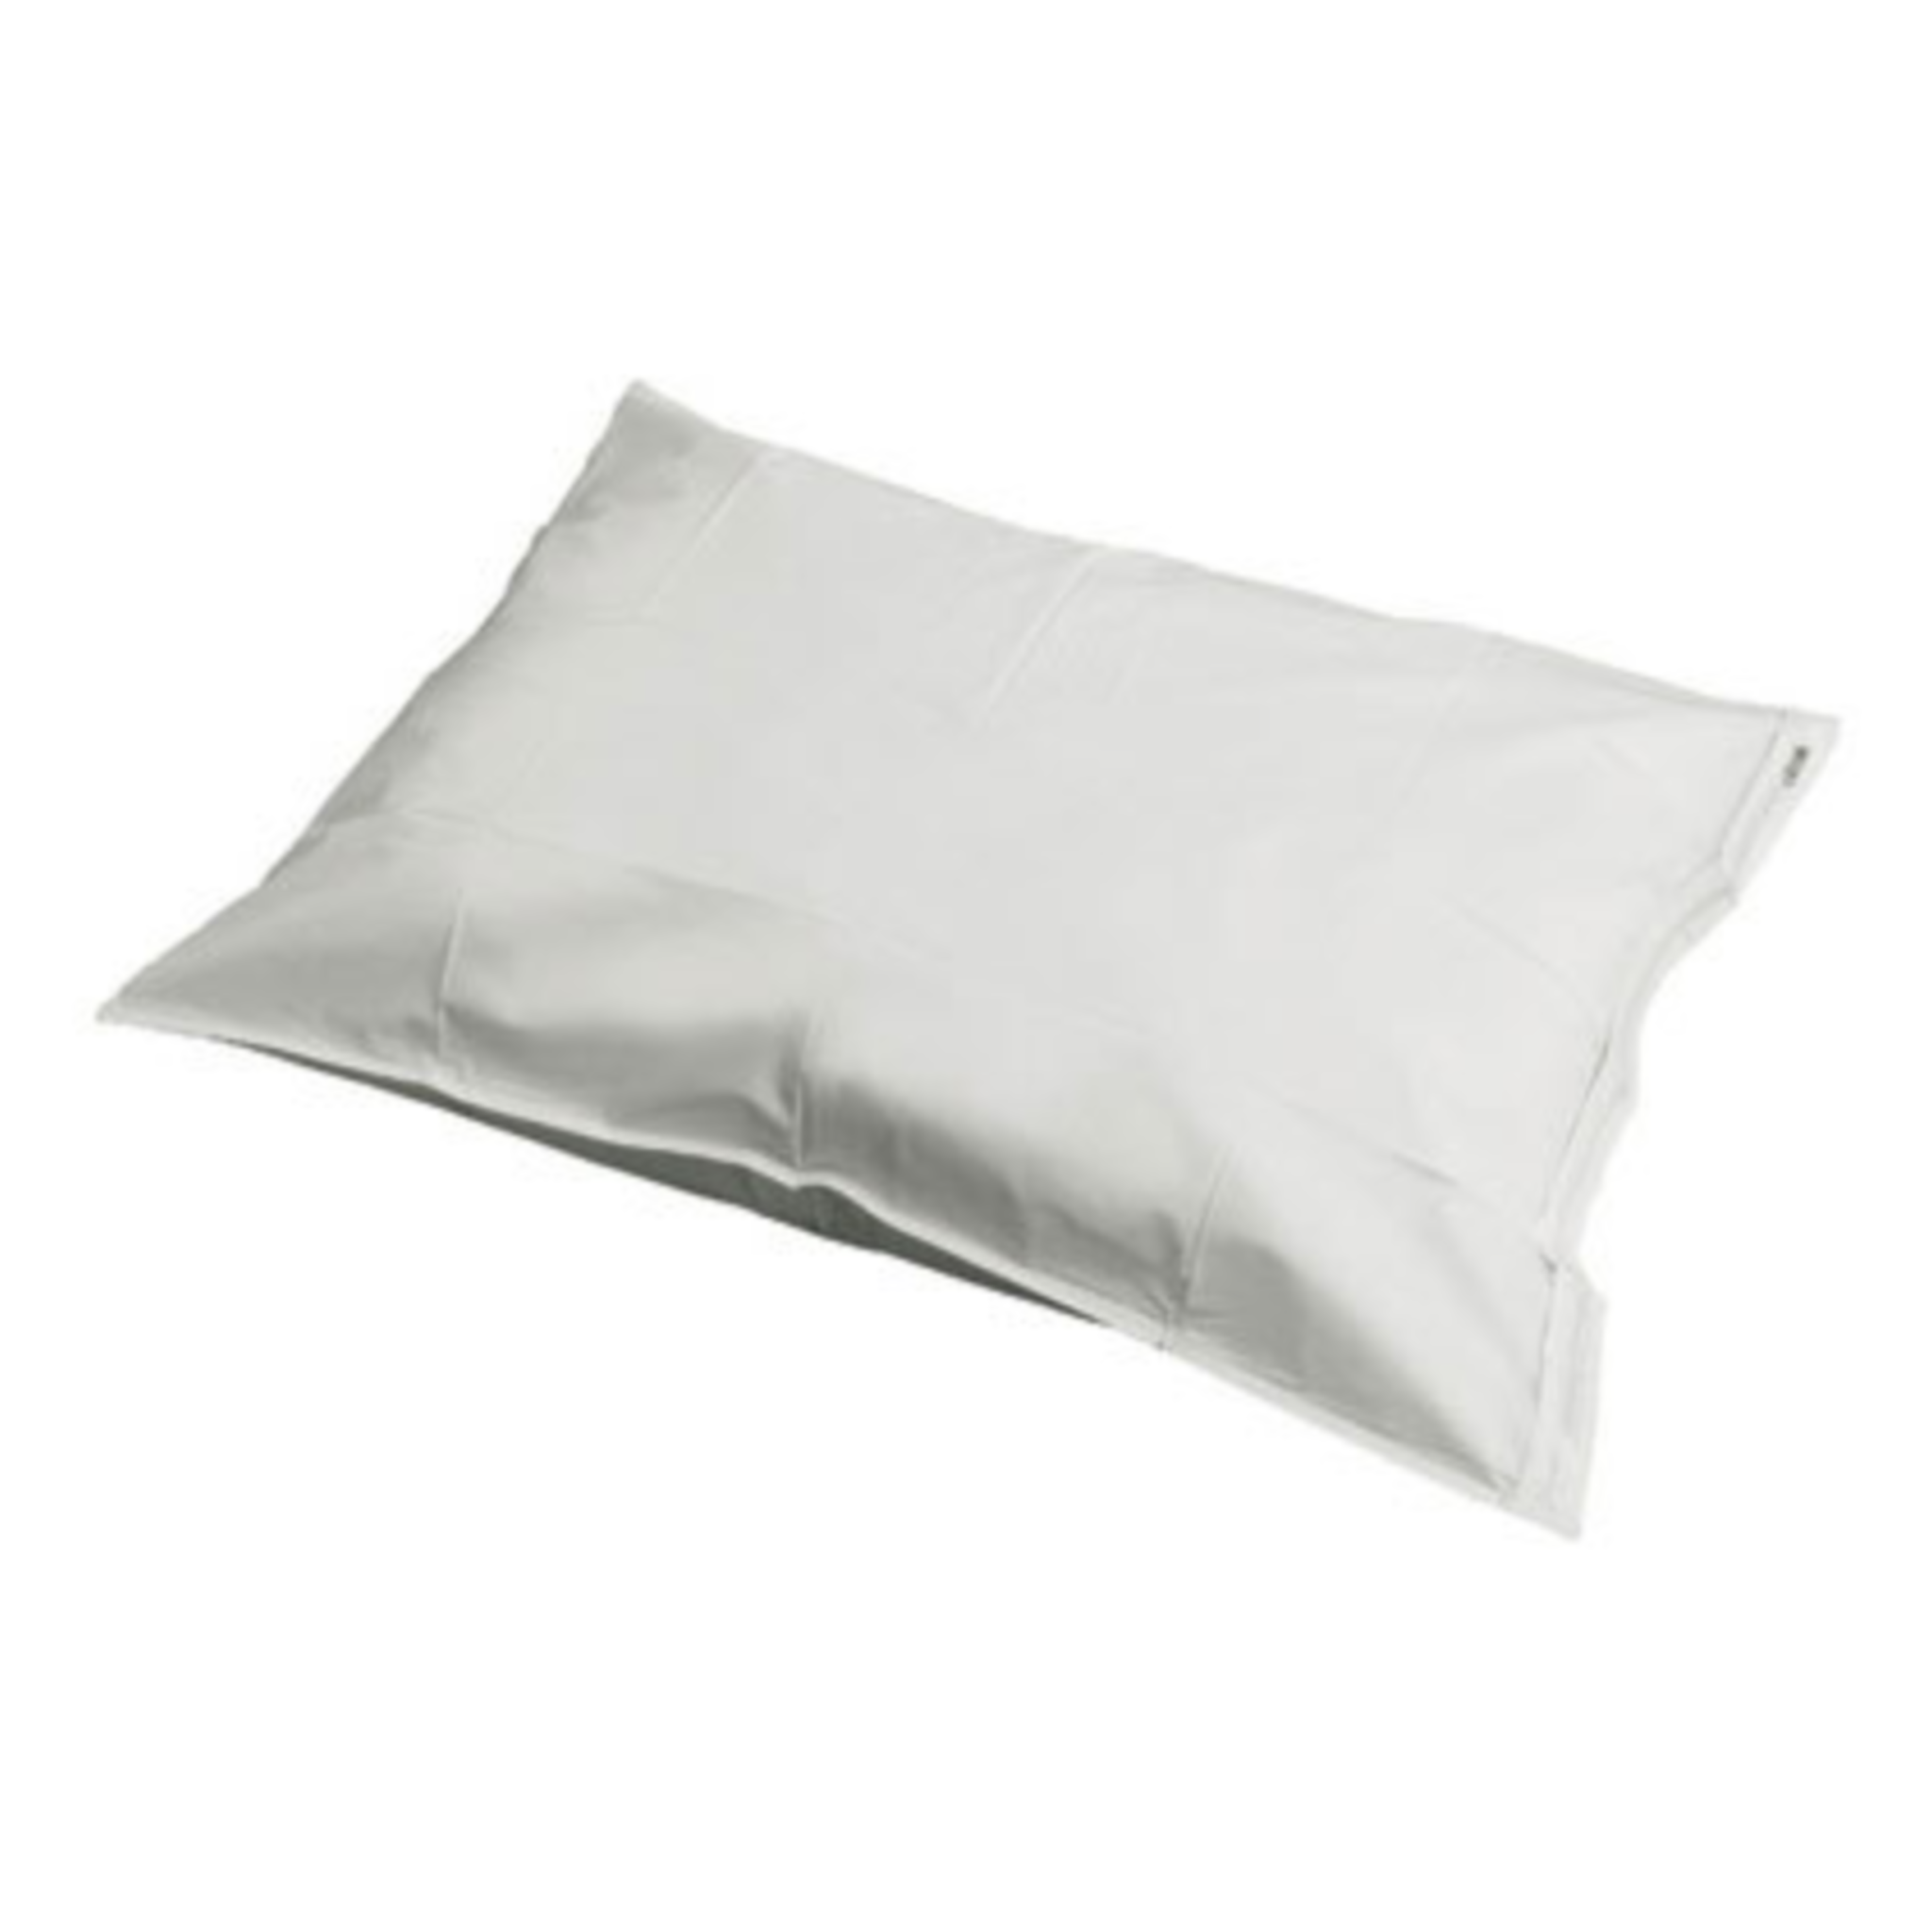 Vinyl Pillow Case Protector with Zippered Closure